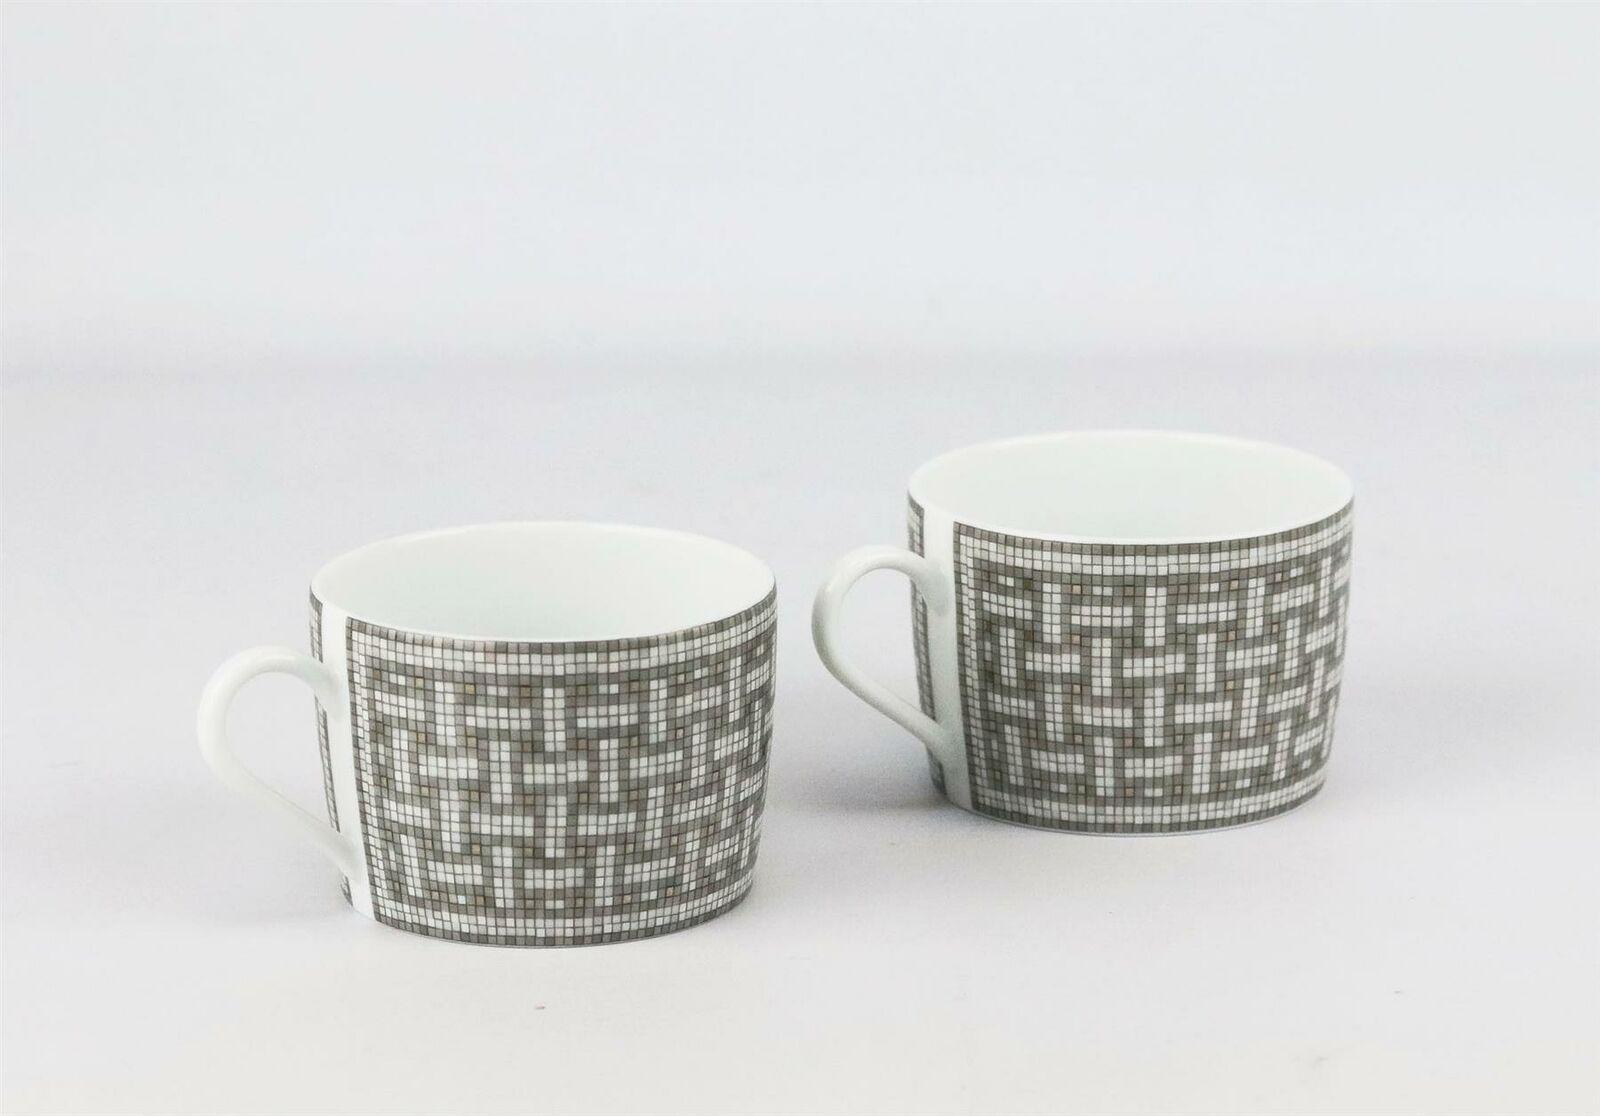 Set of 2 platinum, grey and white porcelain Hermès Mosaïque Au 24 breakfast cup with tile design throughout, gilt accents and brand stamp on the bottom.
Does not come with box.

Dimensions: H 2.25 x D 3 inches.
More available, please